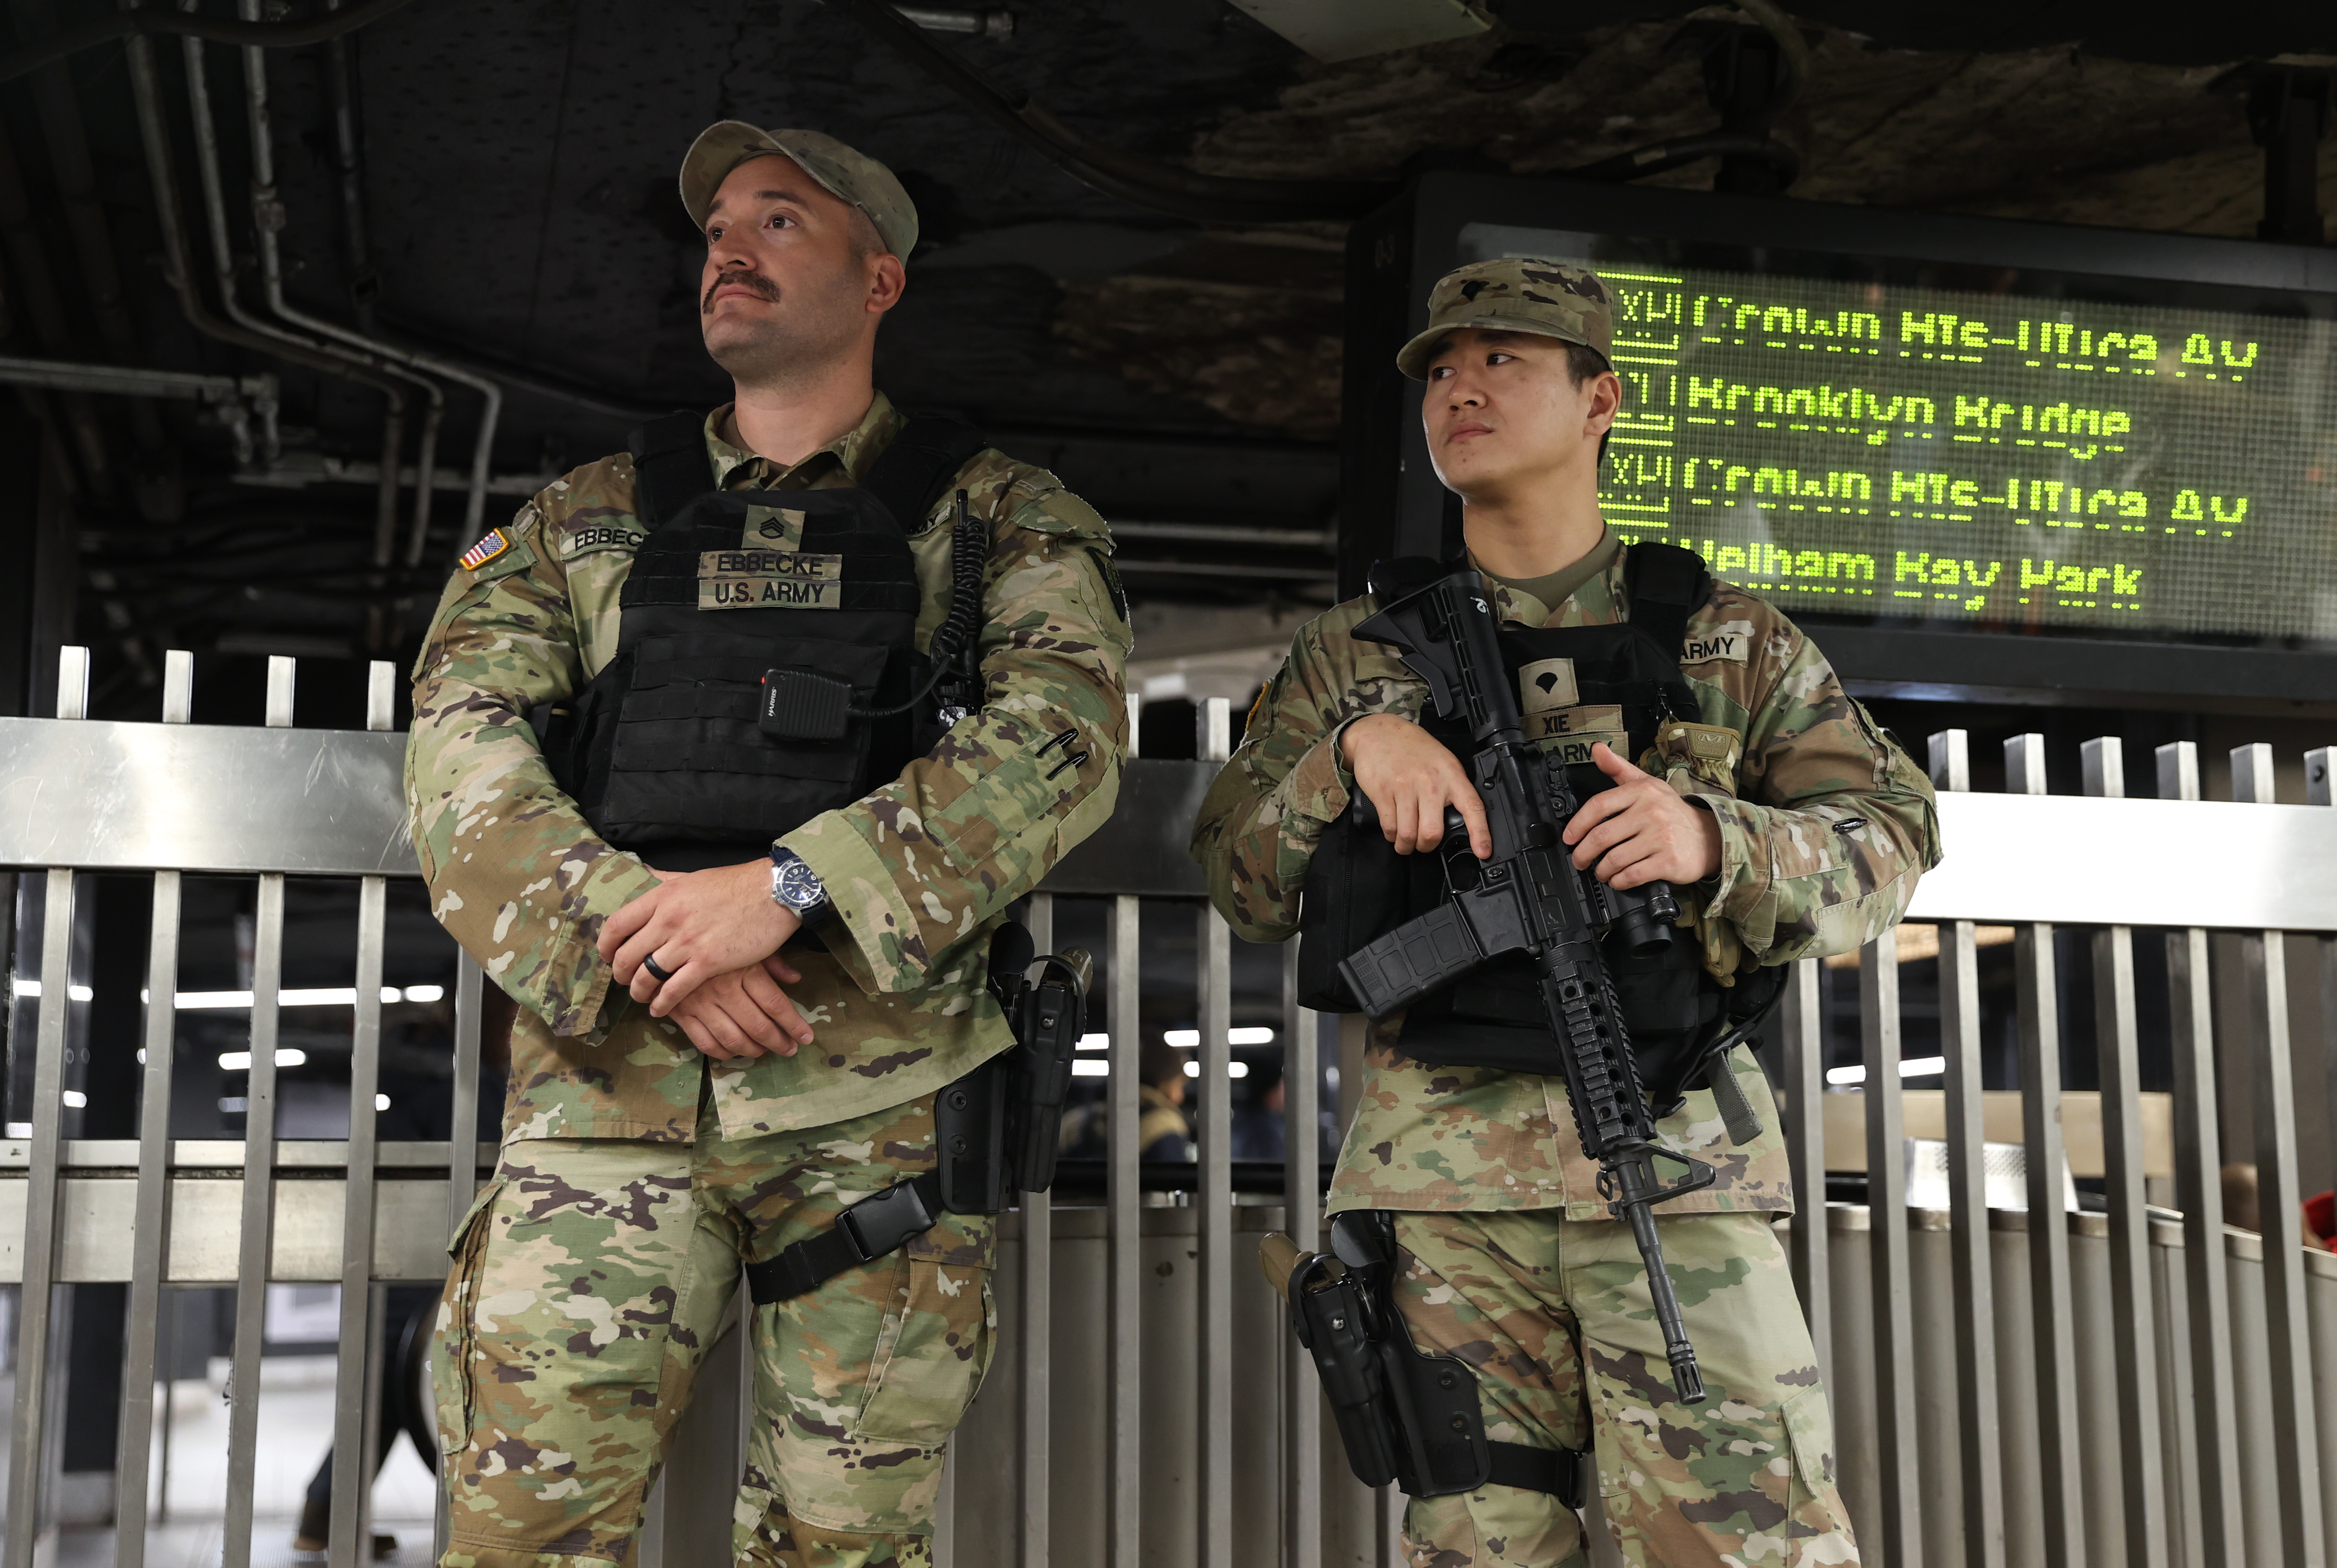 National Guard members posted in a subway station.